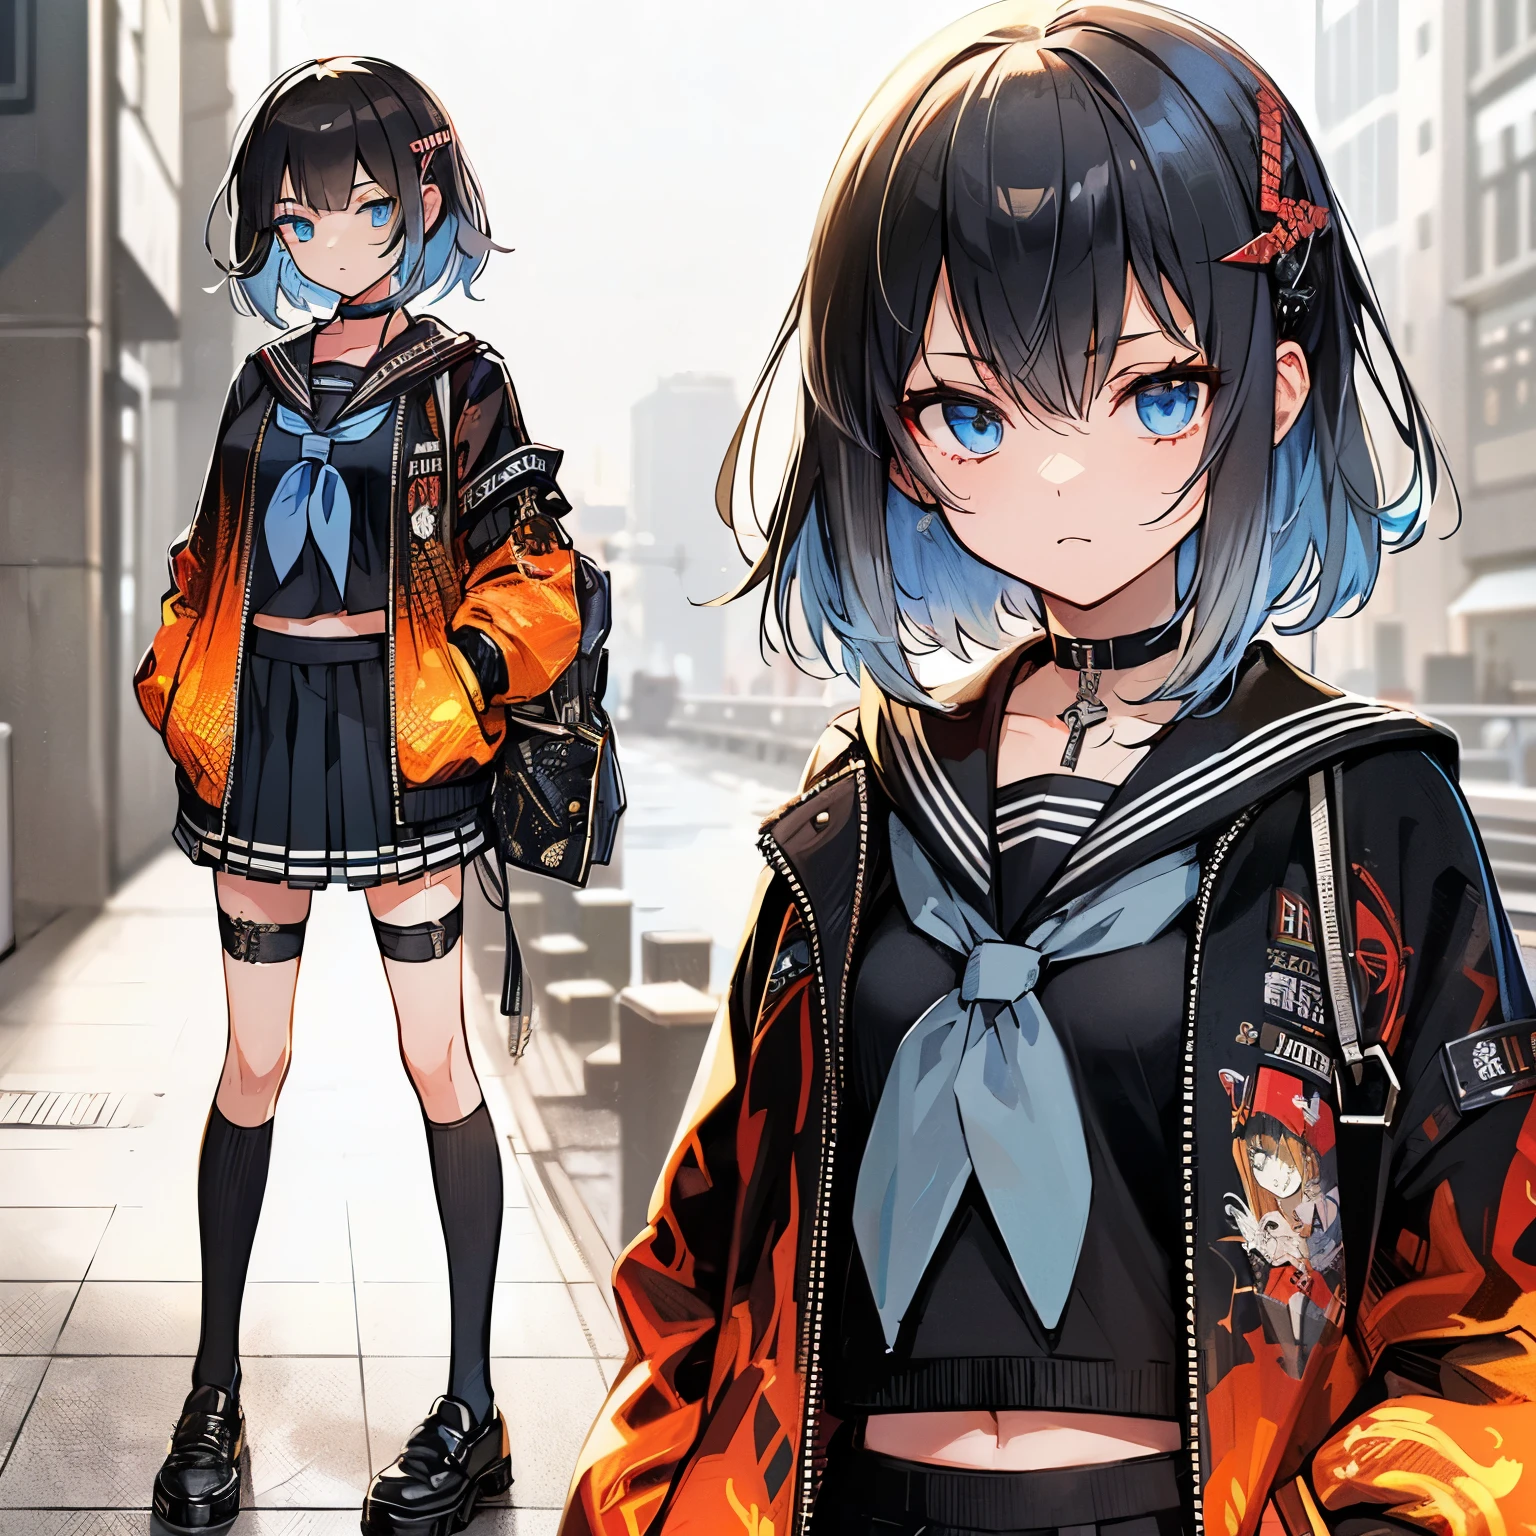 (Masterpiece, top quality), (detailed hair), super detailed, anime style, full body, solo, Cyberpunk badness high school girl, medium short black hair mixed with gray hair, Rebellious, sky-blue eyes, wearing fire patterned jacket over black sailor uniform, school shoes, standing in urban area, white background, whole body,
